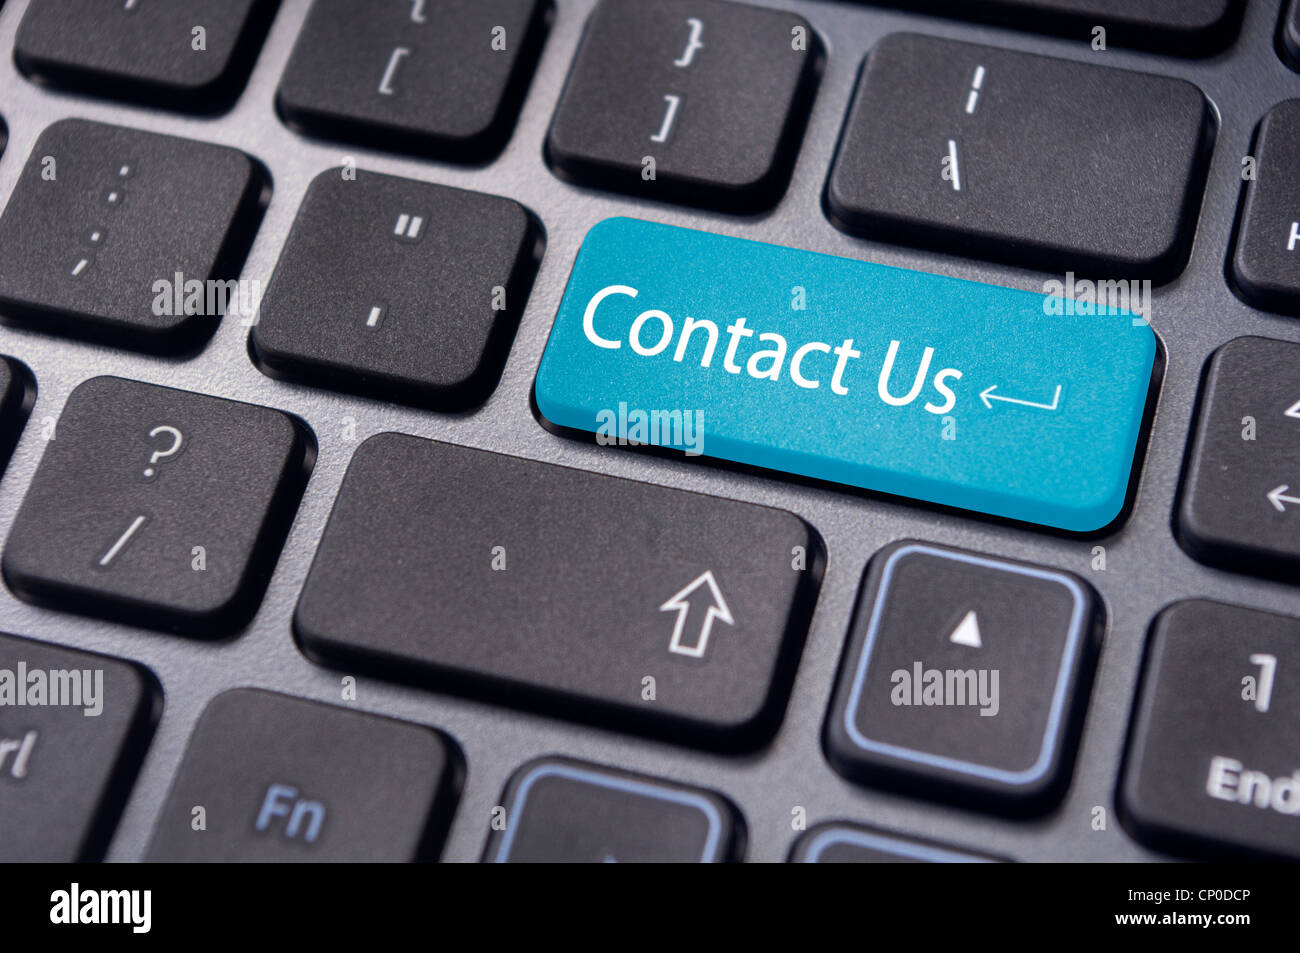 A 'contact us' message on enter key of keyboard, for online communications. Stock Photo